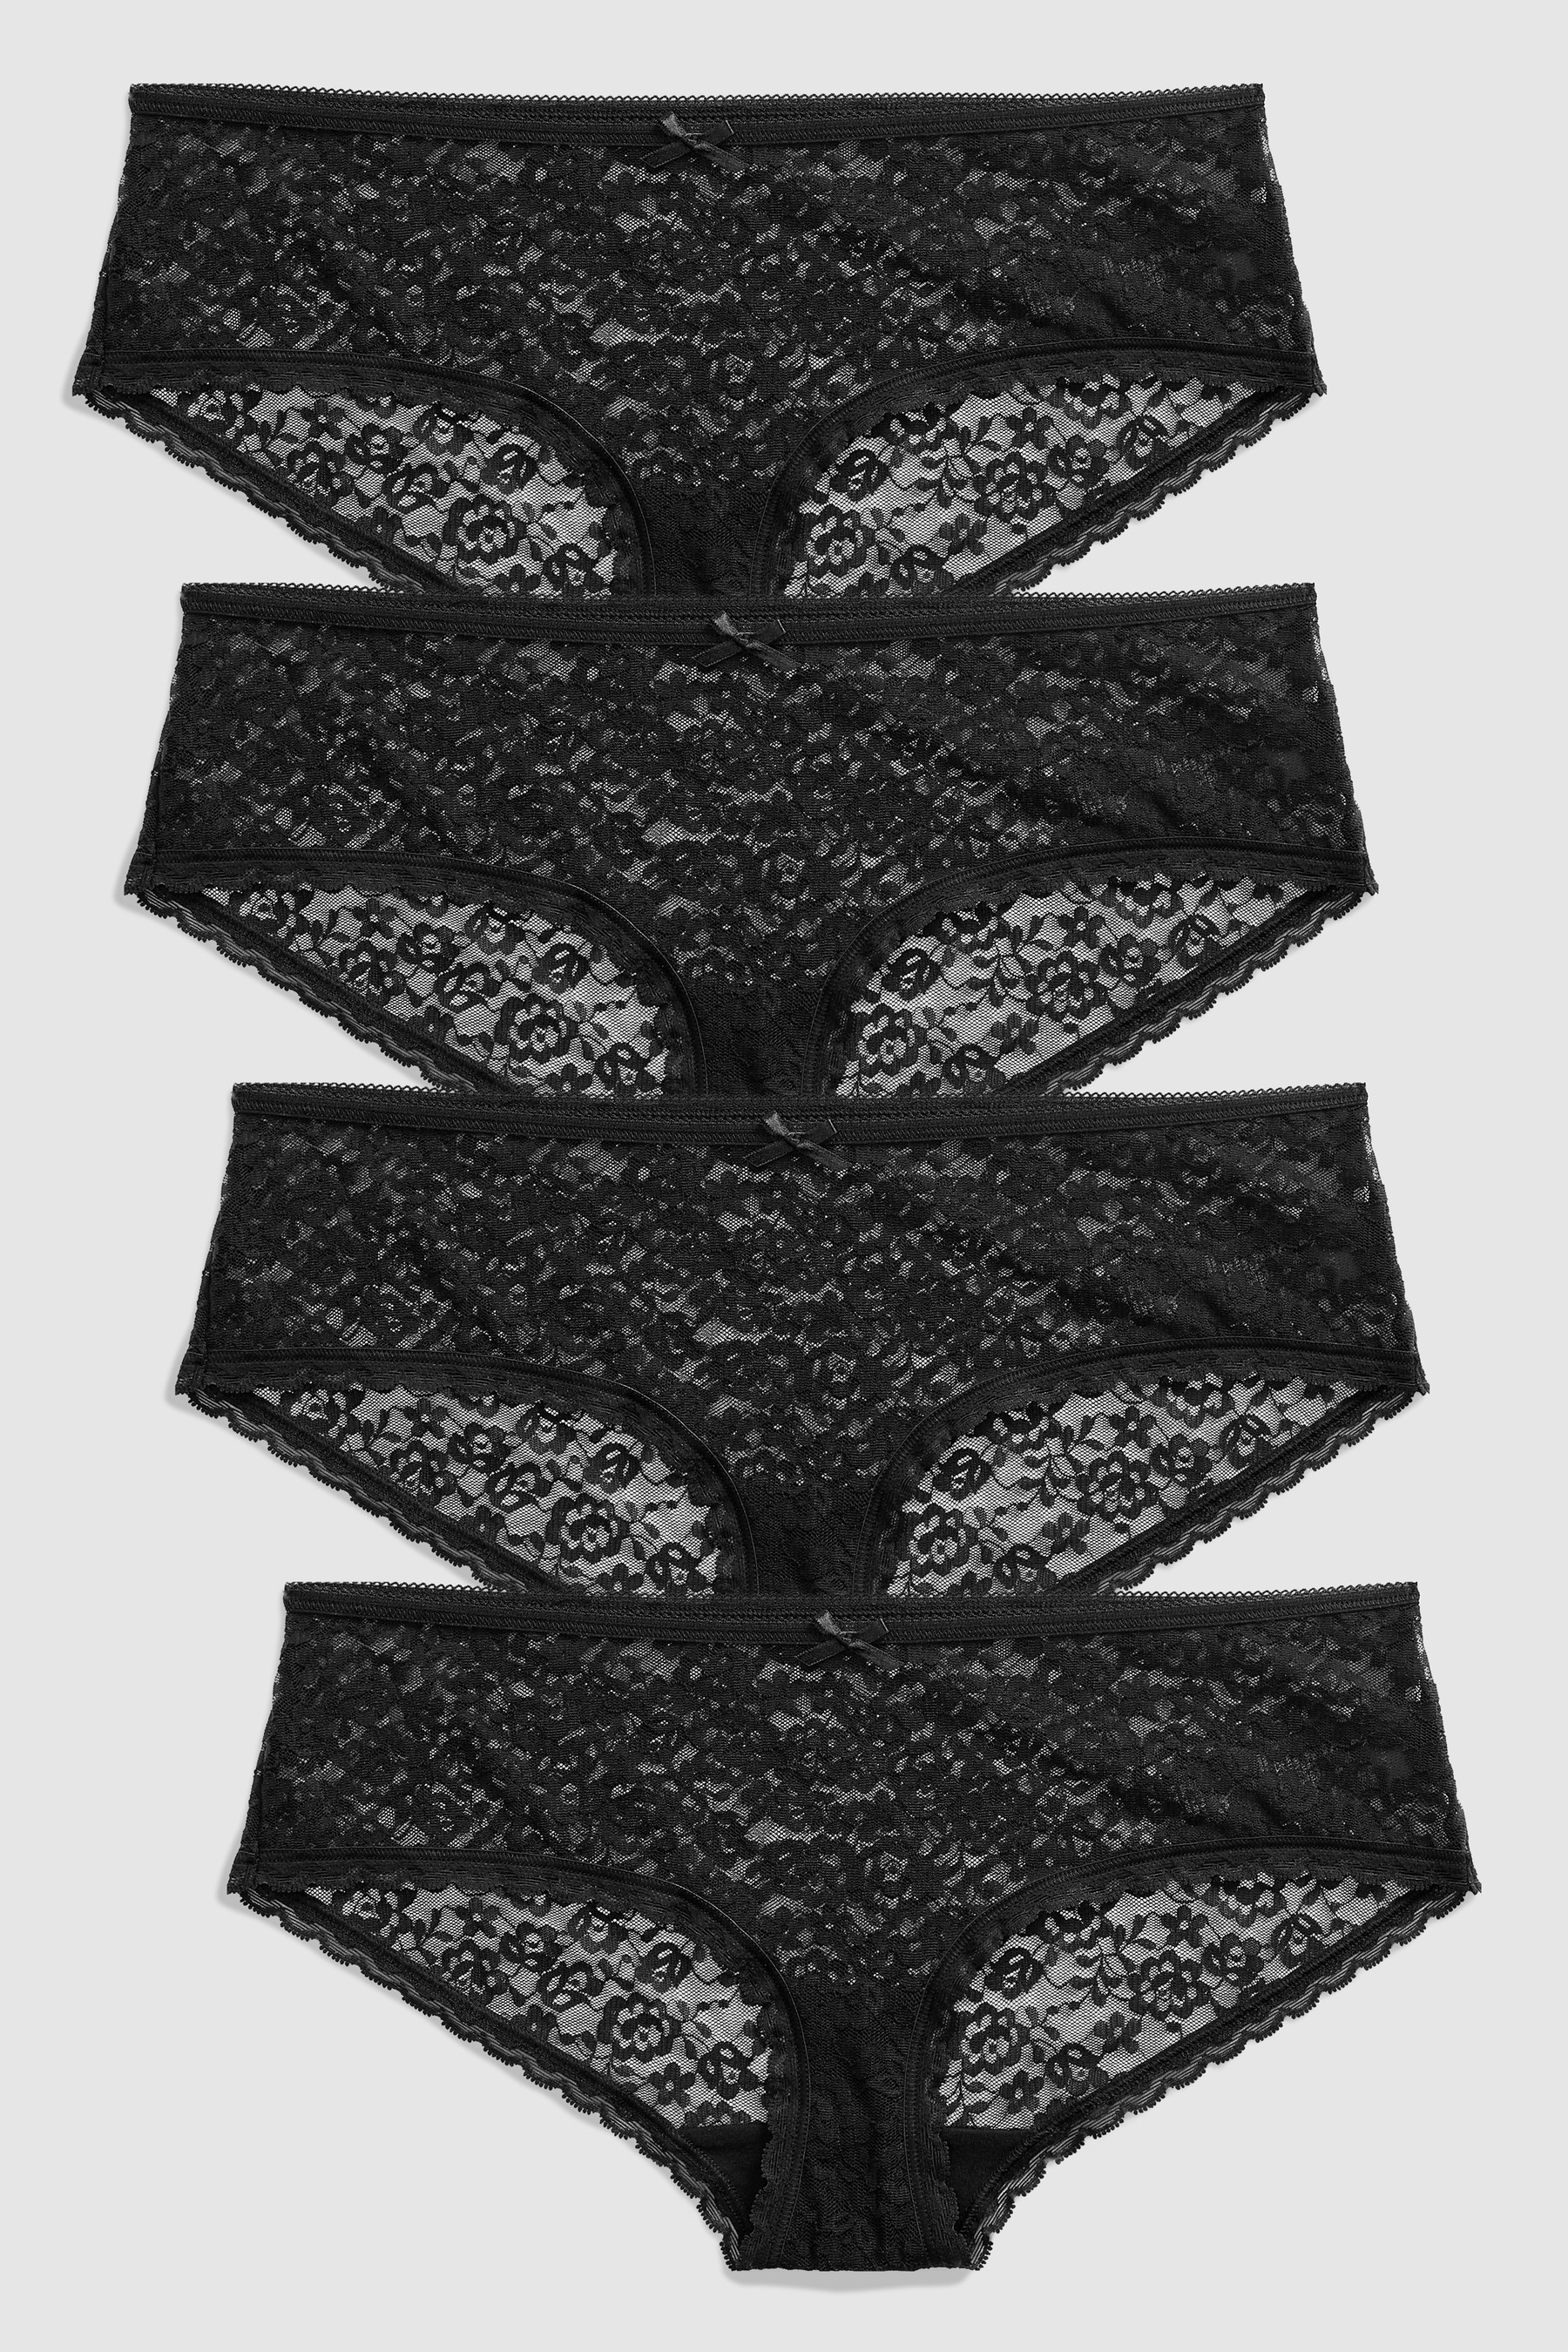 Lace Knickers 4 Pack Short